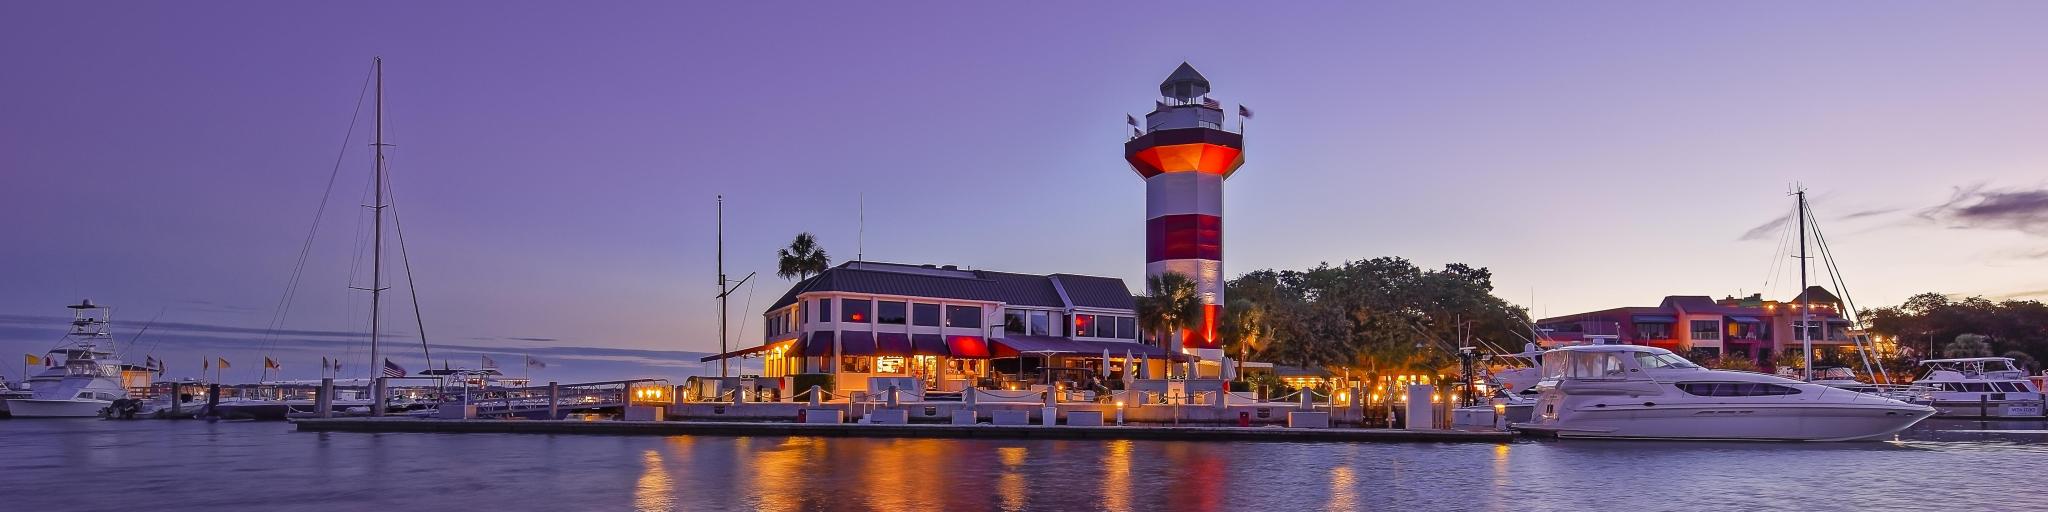 Dusk at downtown Hilton Head Island, with the iconic, historic lighthouse set against a purple sky